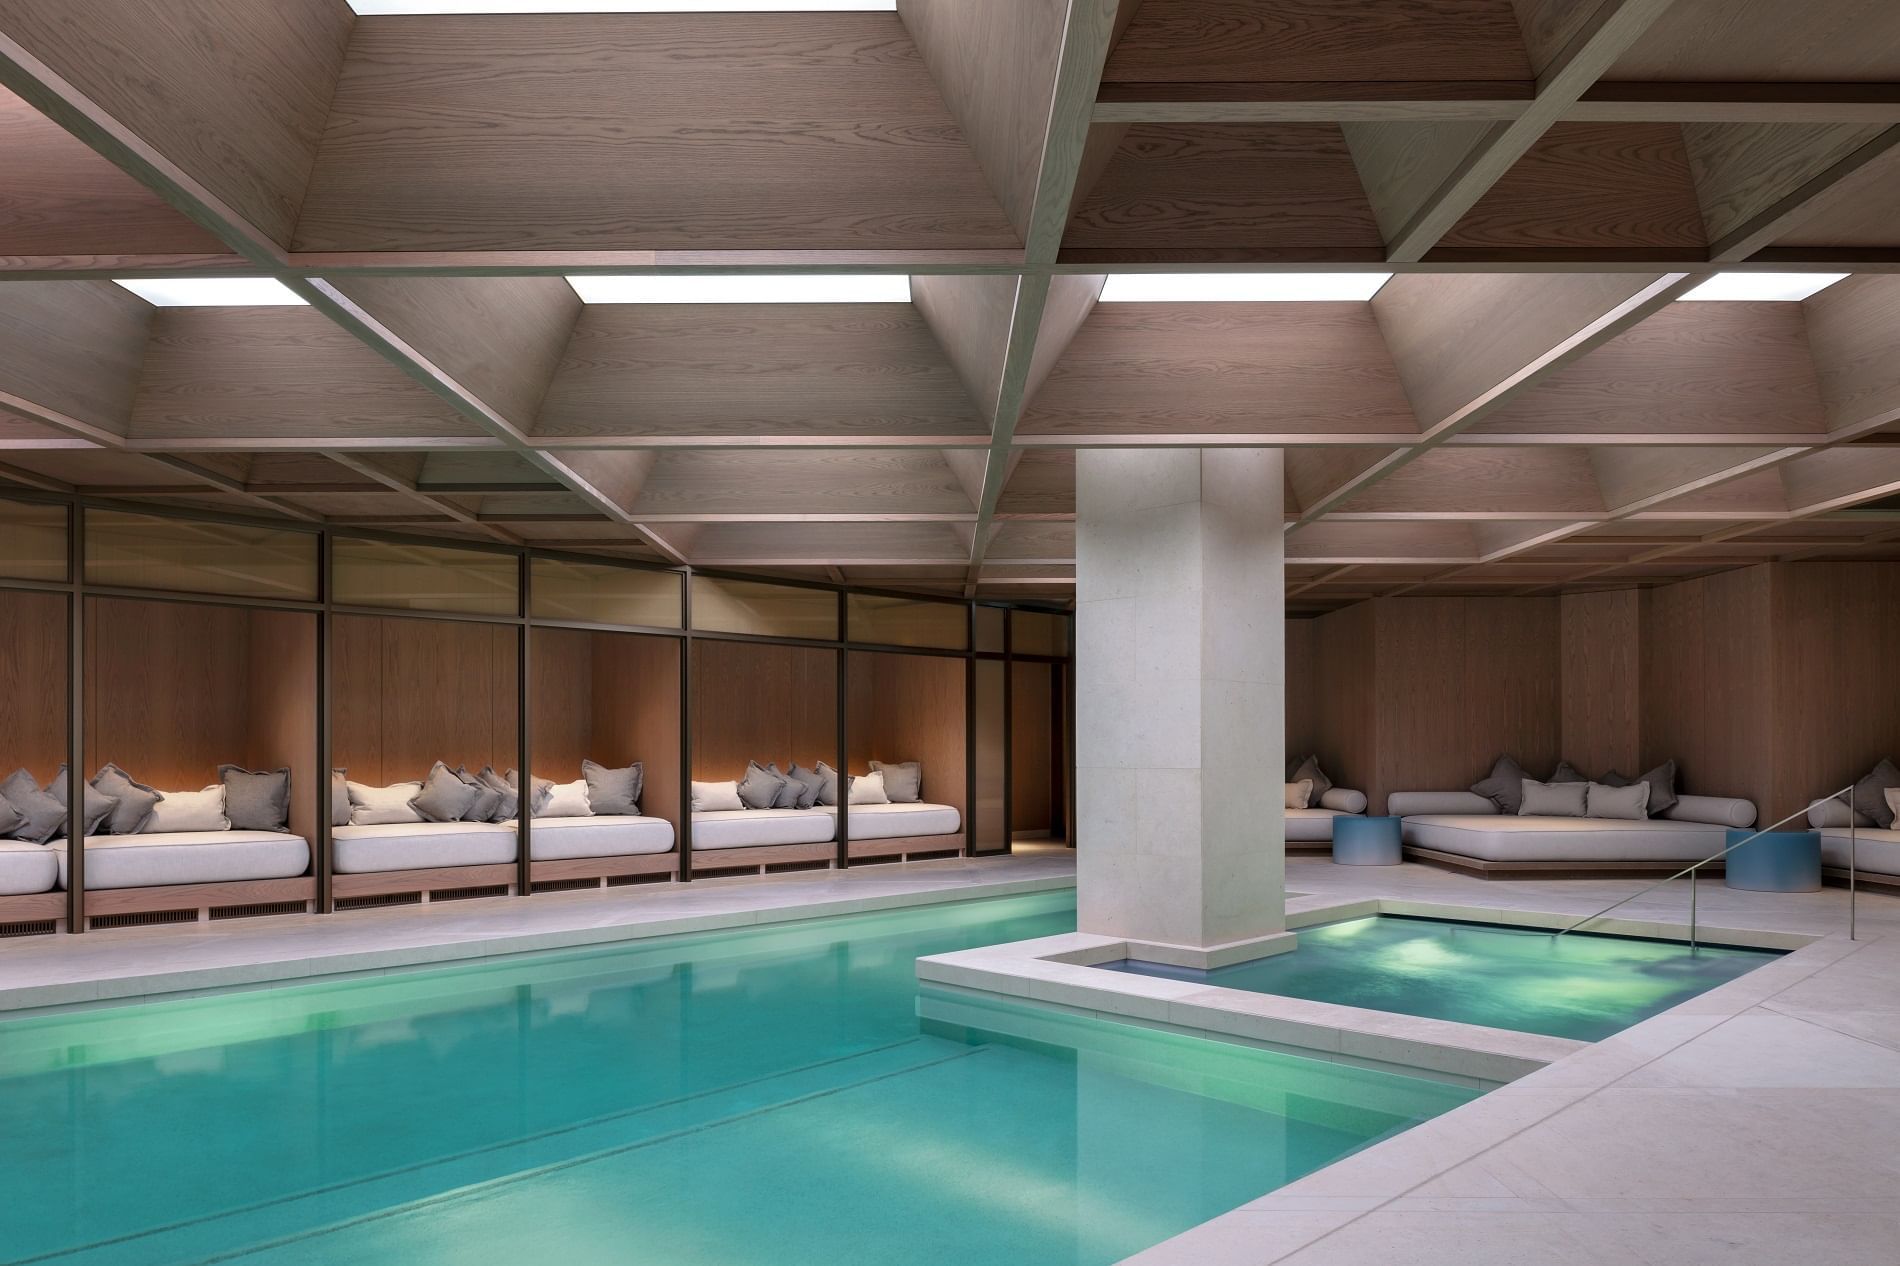 Concept design of the Indoor pool area at The Londoner Hotel